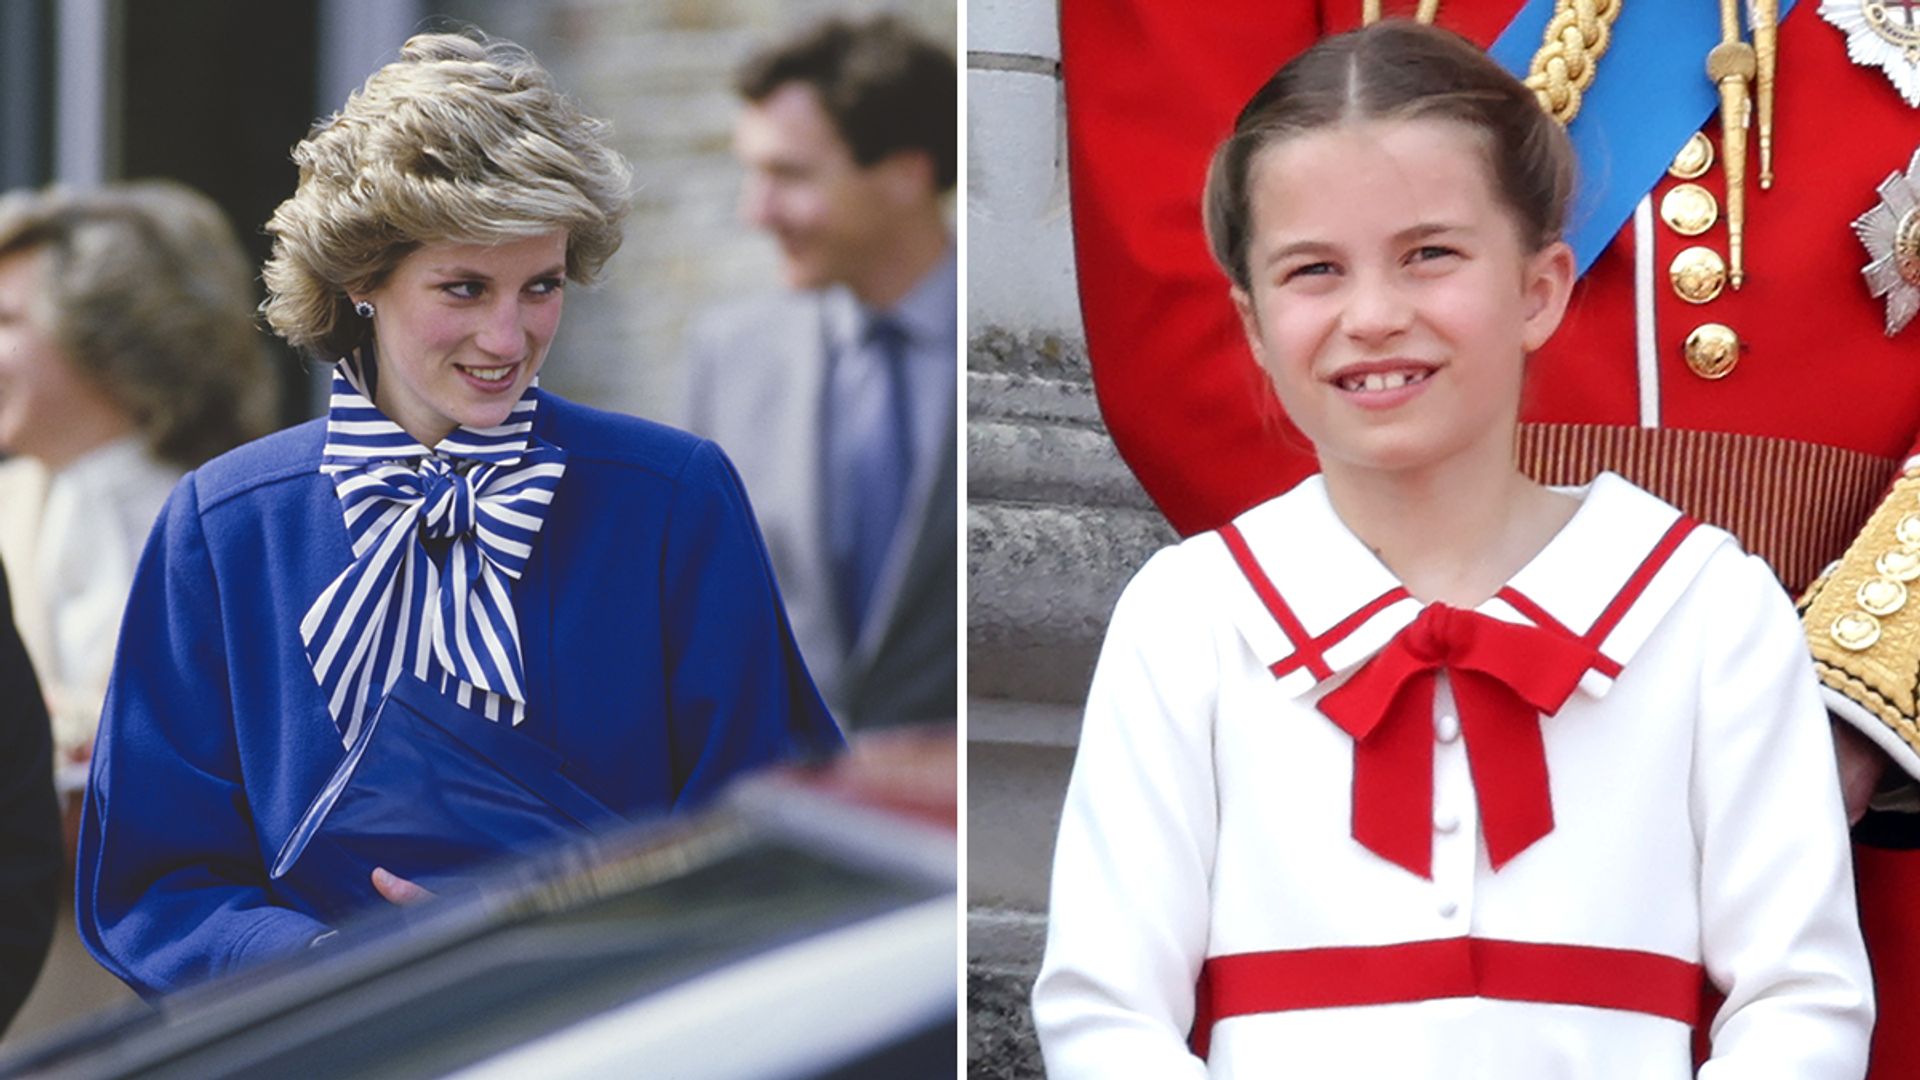 Princess Charlotte is following in Princess Diana's footsteps in the sweetest way